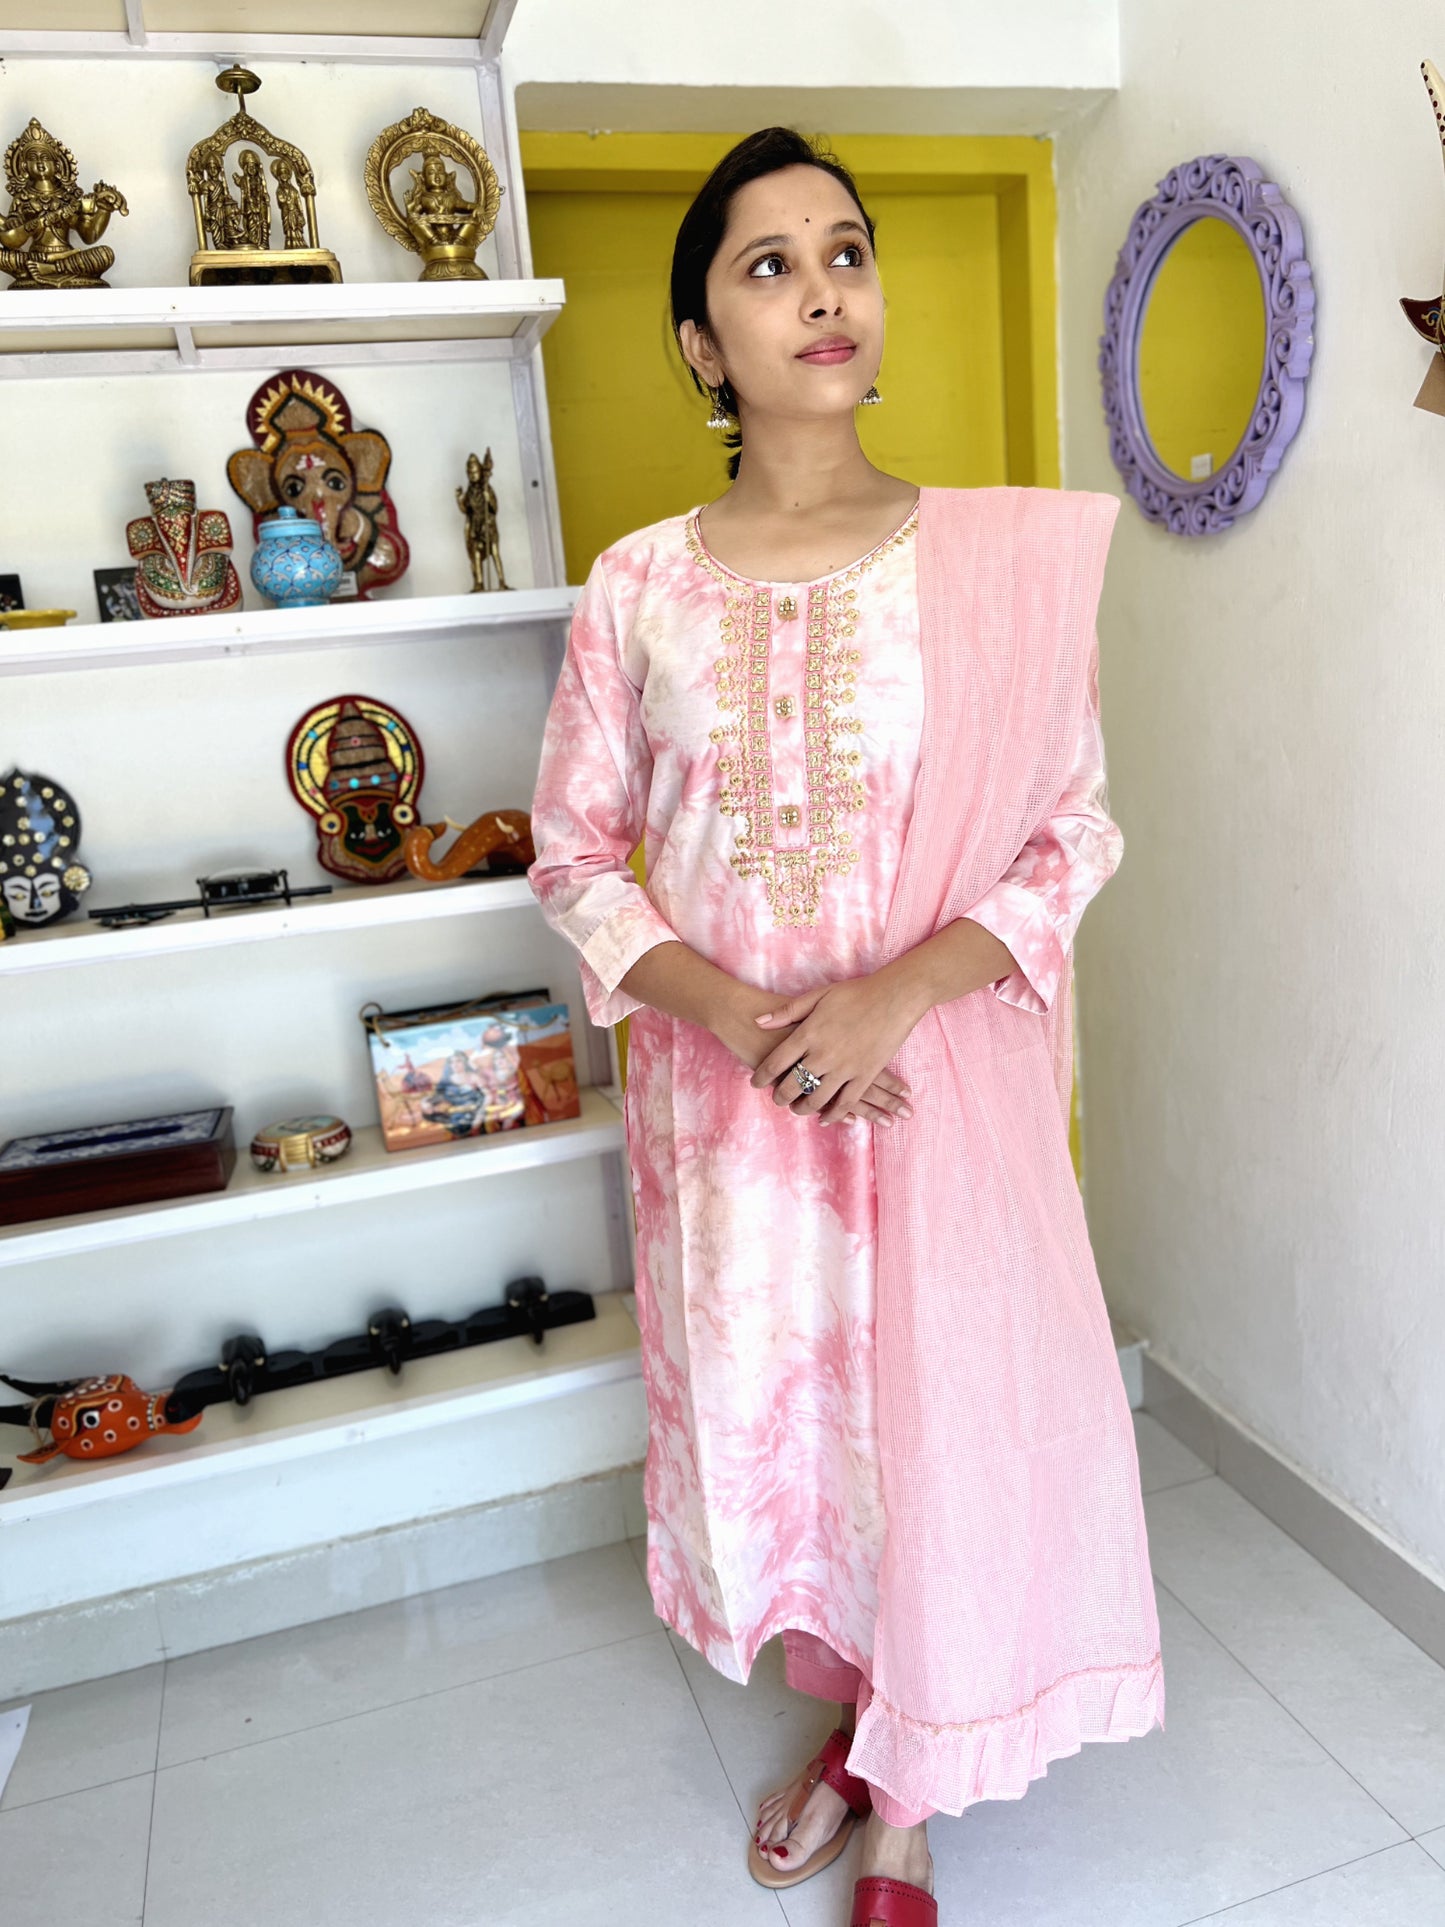 Southloom Stitched Semi Silk Salwar Set in Pink with Printed Design on Body and Thread Bead works in Yoke Portion